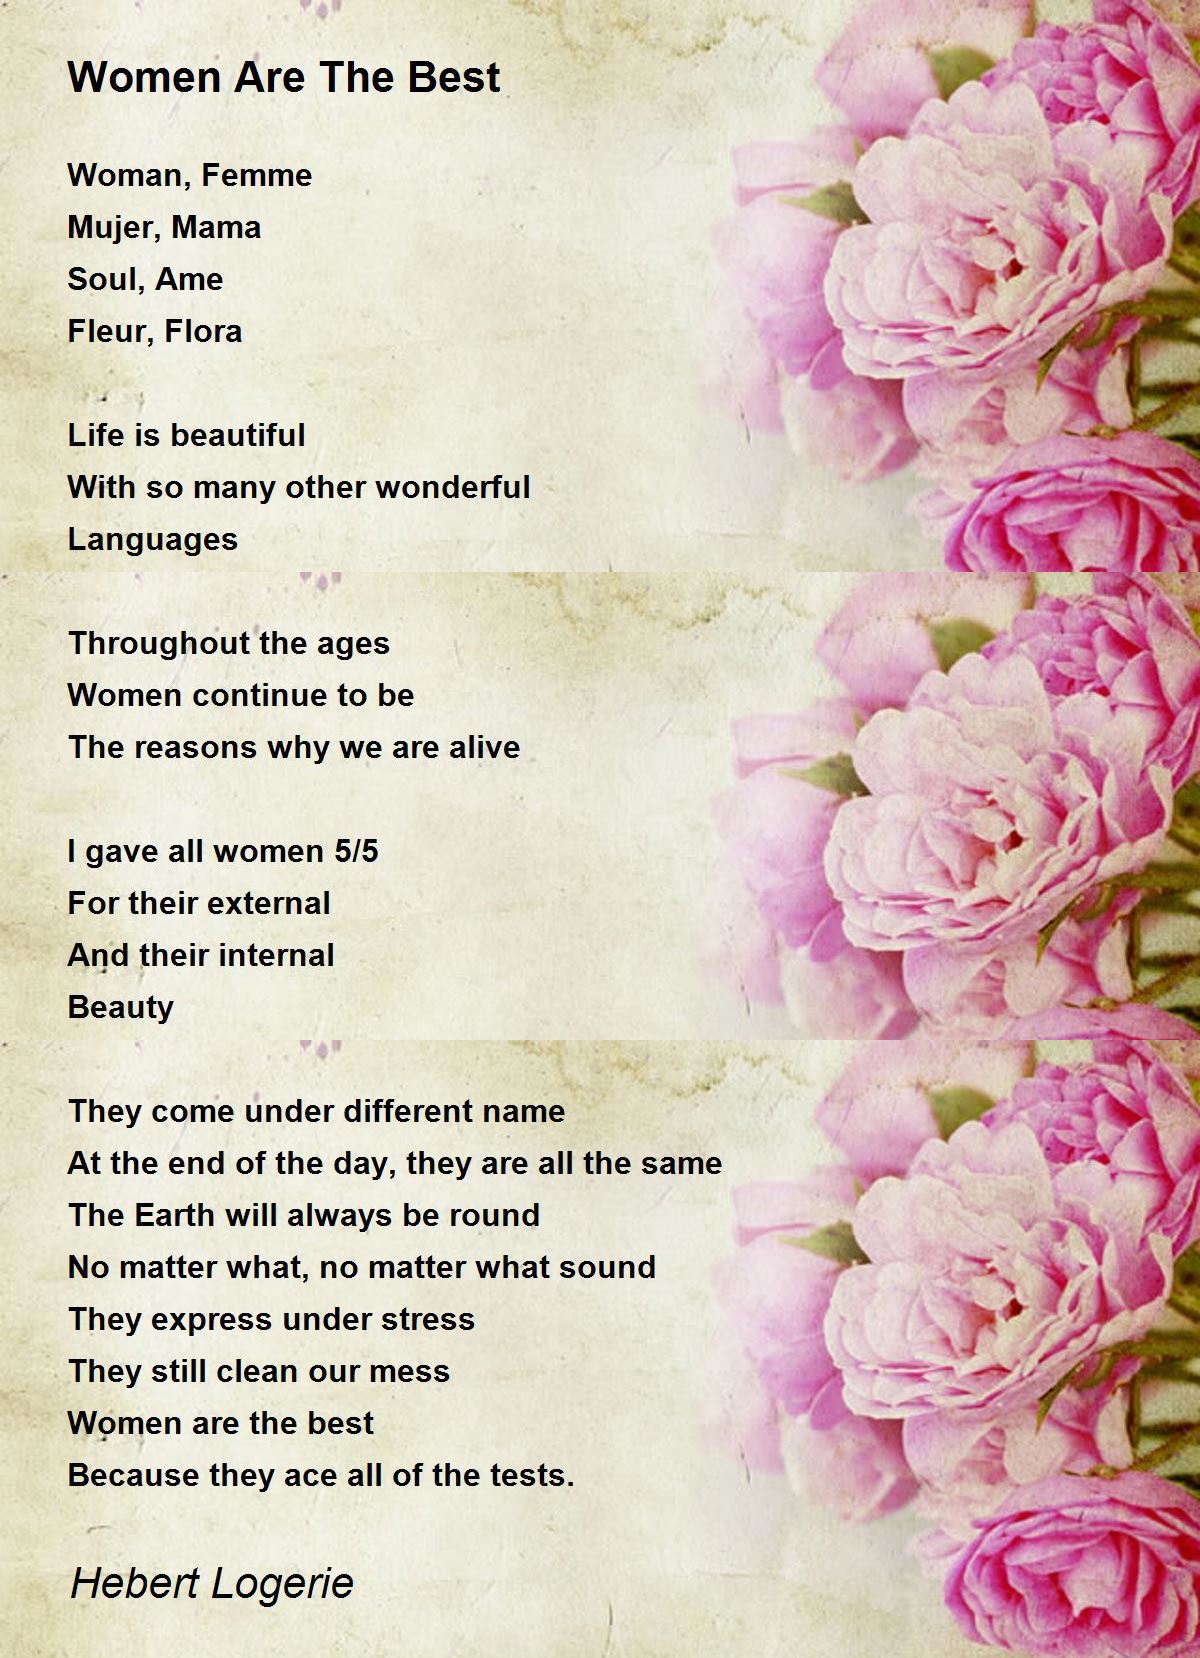 poetry essay on the woman